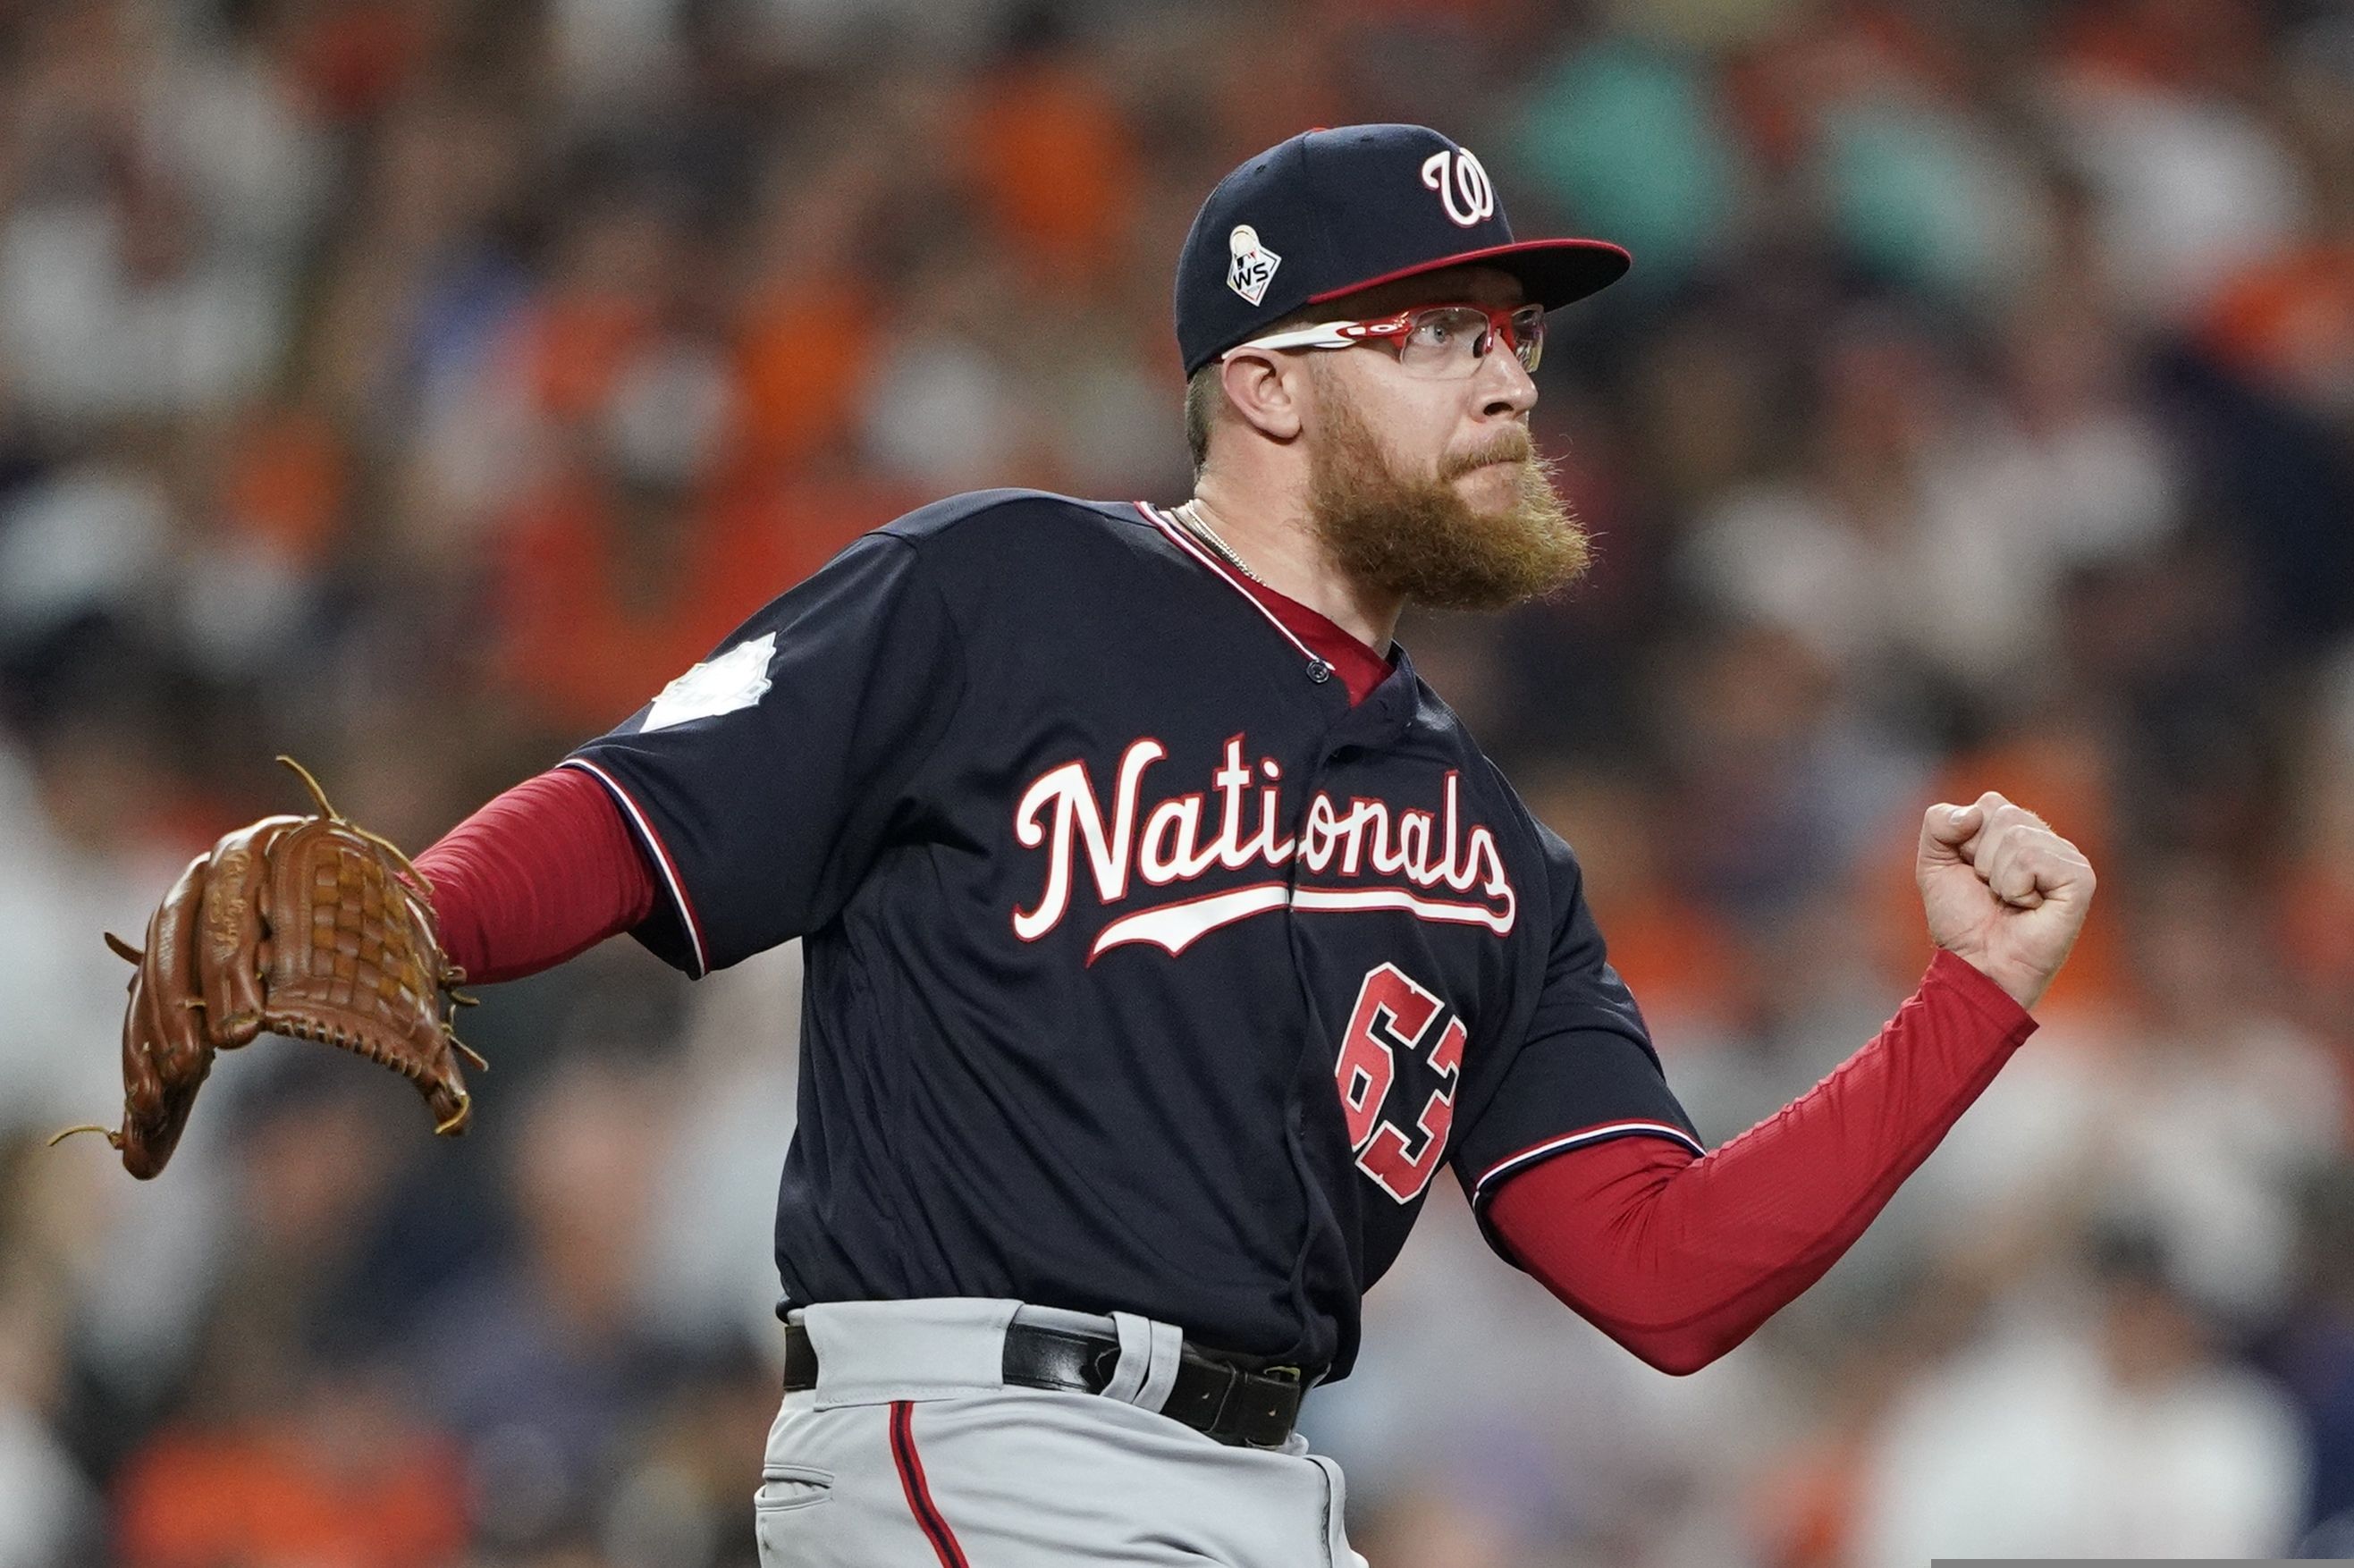 Nationals pitcher Sean Doolittle announces his retirement after more than a  decade in the majors – KGET 17